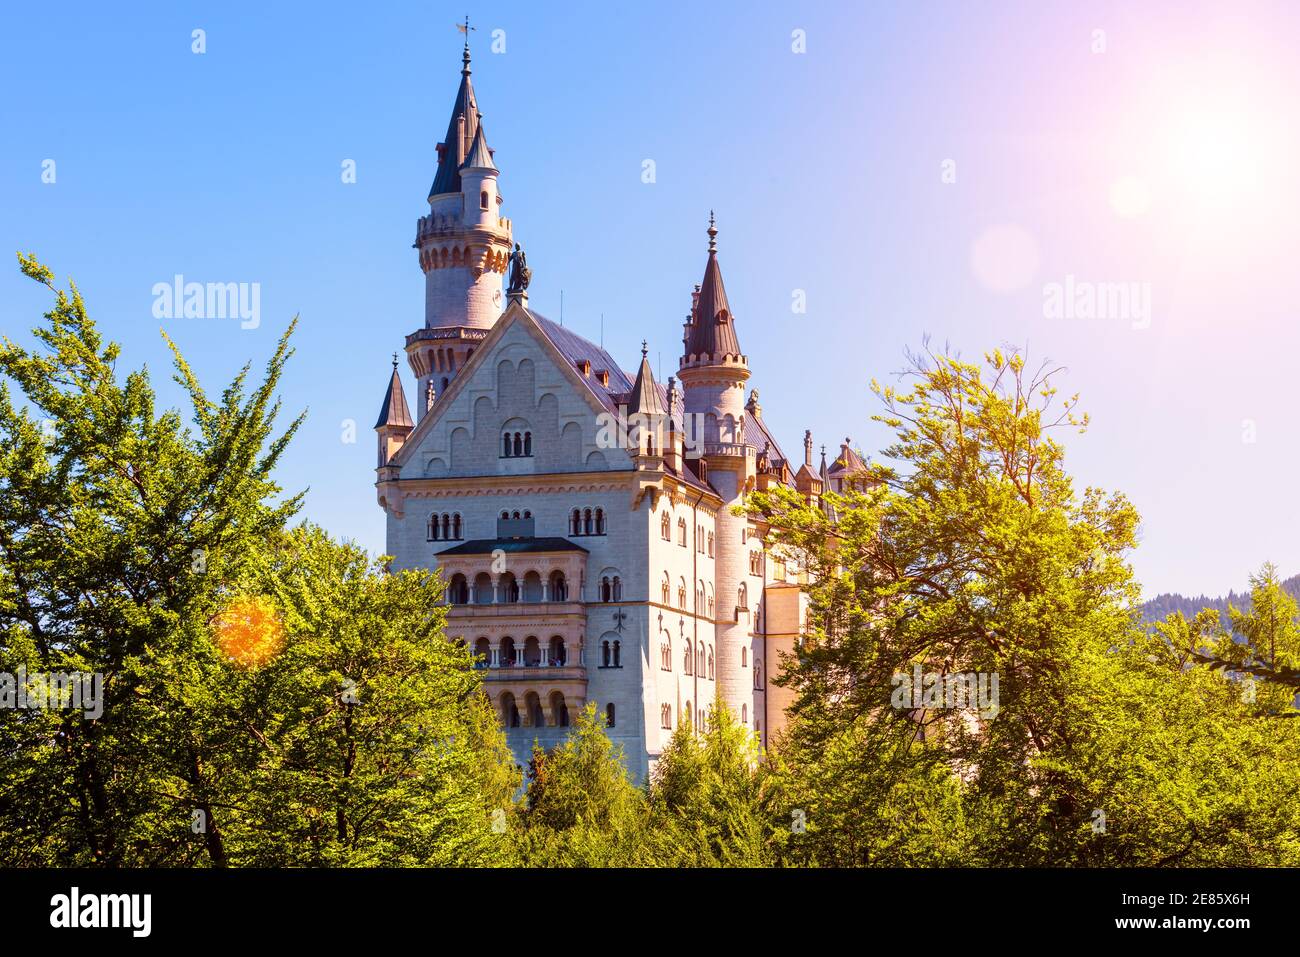 Neuschwanstein Castle in sunlight, Germany, Europe. Scenic sunny view of fairytale castle in Munich vicinity, famous tourist attraction of Bavarian Al Stock Photo